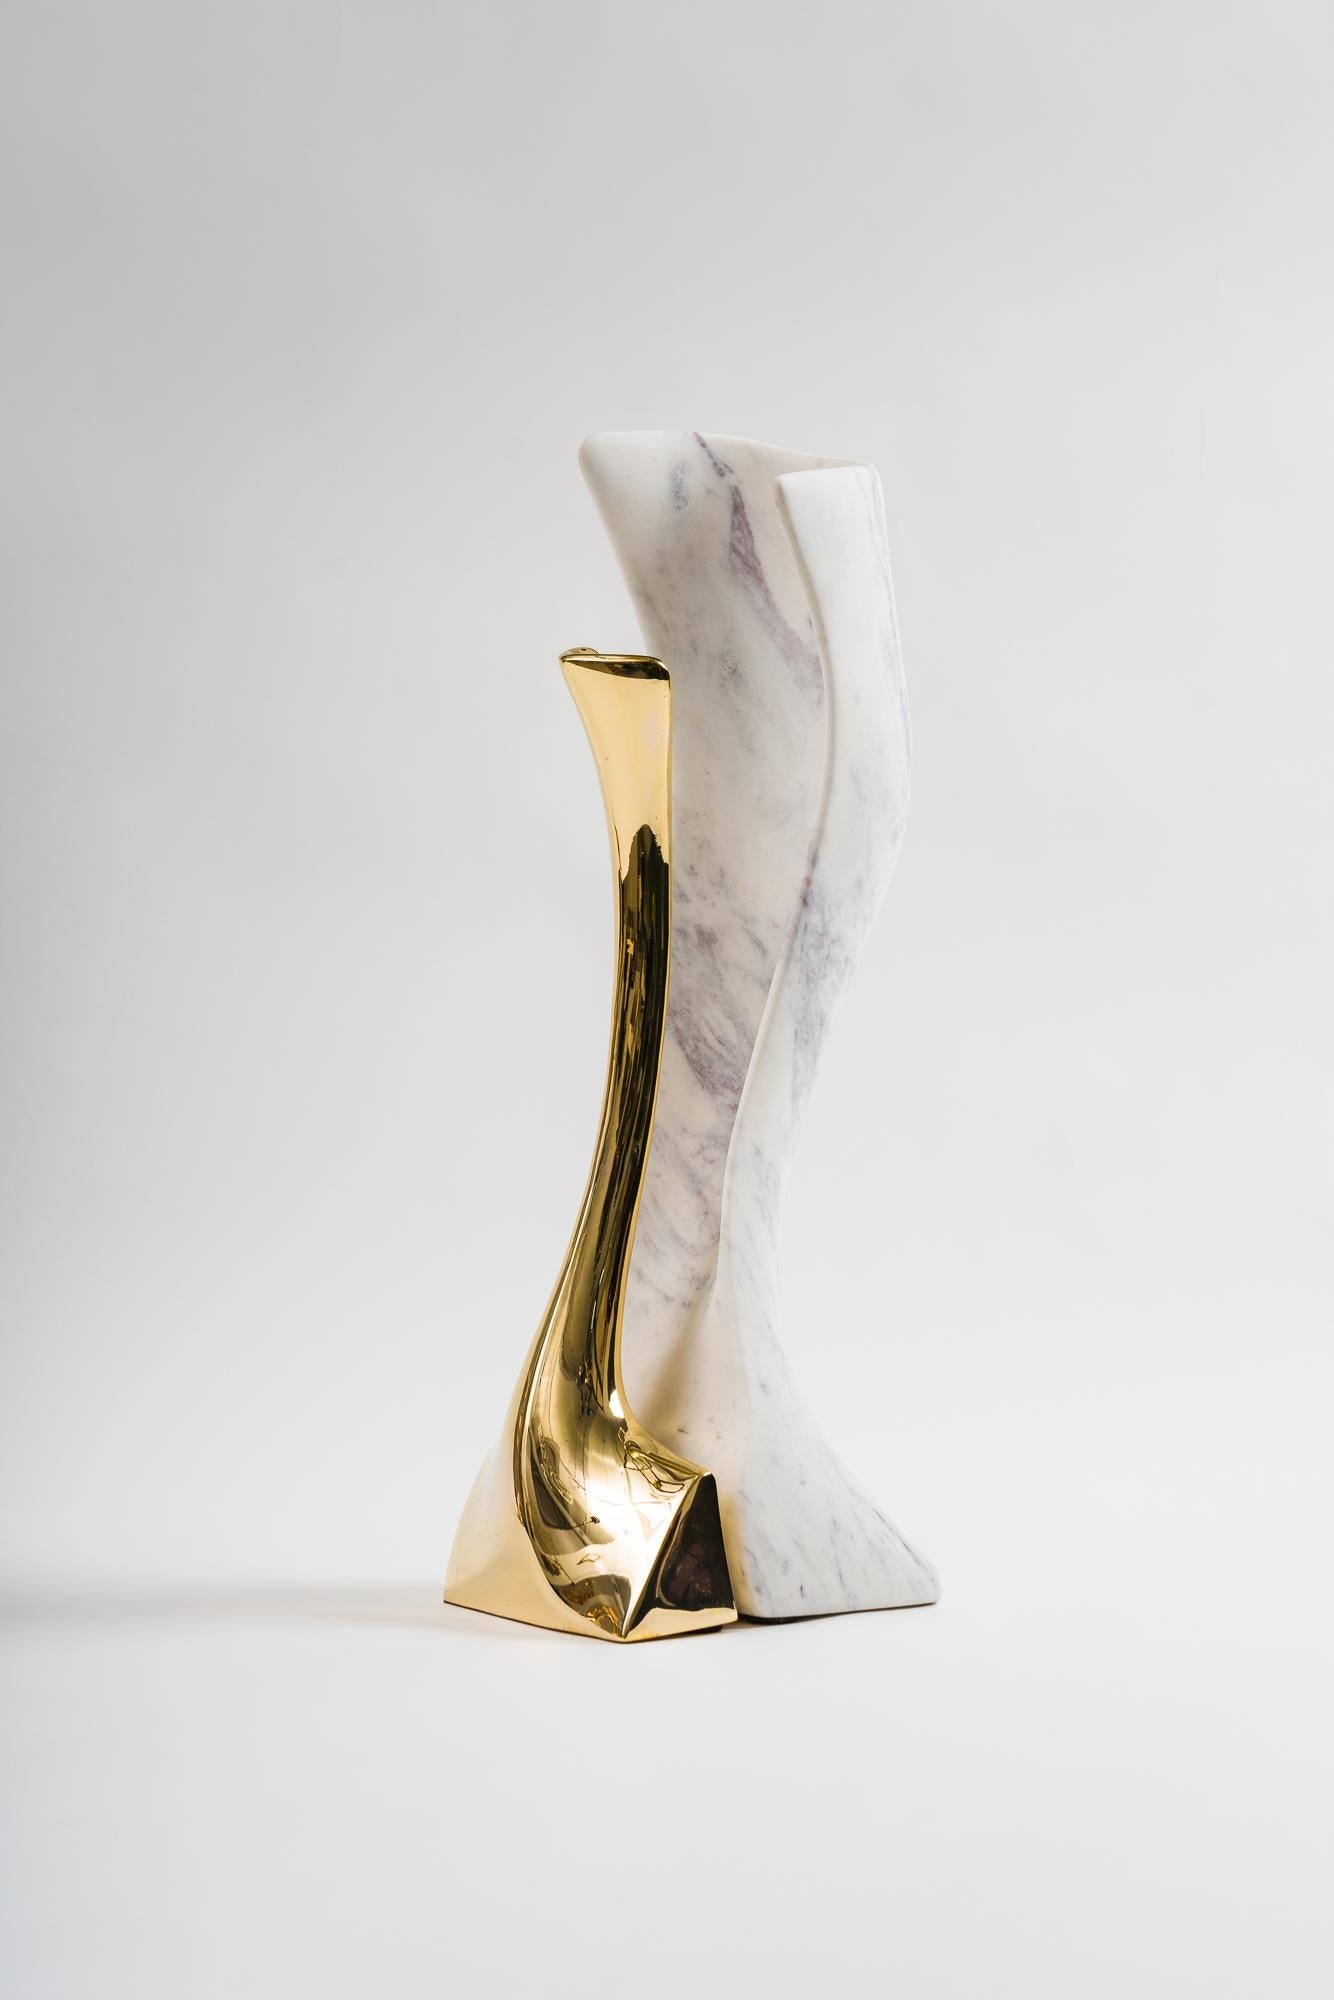 True to form, Alex Roskin’s LED sculptural lamp, in brass and marble, has the same perfectly proportioned curves as his unique bronze and steel furniture pieces. Internal LEDs bounce off of the marble, giving the work a warm glow that punctuates its